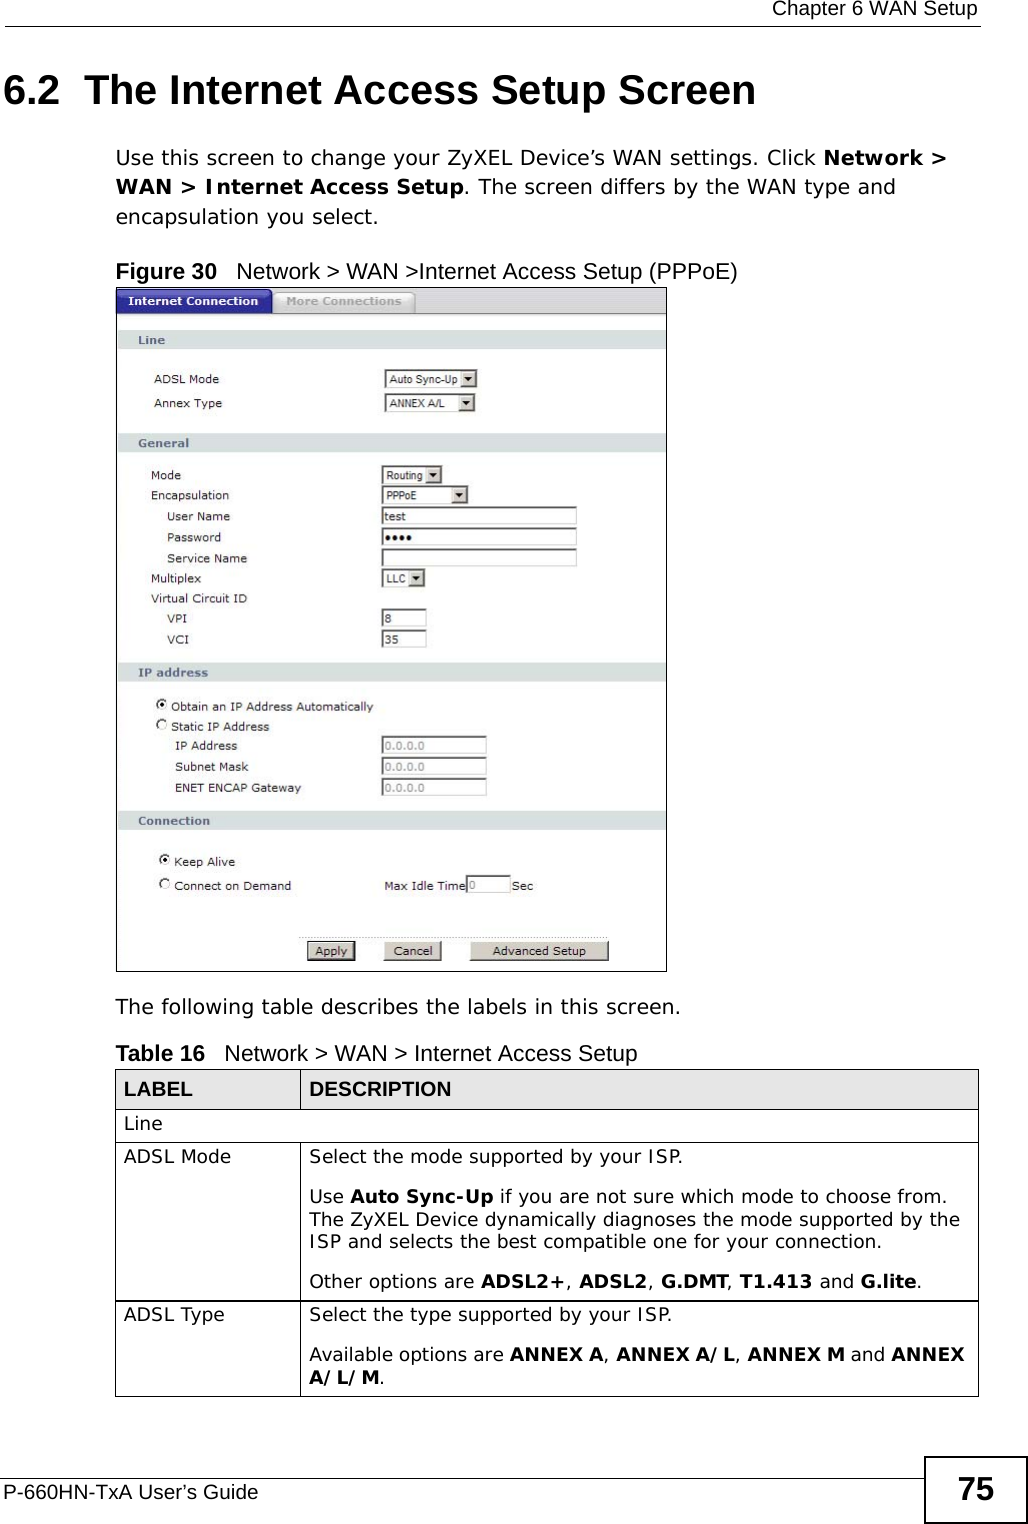  Chapter 6 WAN SetupP-660HN-TxA User’s Guide 756.2  The Internet Access Setup ScreenUse this screen to change your ZyXEL Device’s WAN settings. Click Network &gt; WAN &gt; Internet Access Setup. The screen differs by the WAN type and encapsulation you select.Figure 30   Network &gt; WAN &gt;Internet Access Setup (PPPoE)The following table describes the labels in this screen.  Table 16   Network &gt; WAN &gt; Internet Access SetupLABEL DESCRIPTIONLineADSL Mode Select the mode supported by your ISP.Use Auto Sync-Up if you are not sure which mode to choose from. The ZyXEL Device dynamically diagnoses the mode supported by the ISP and selects the best compatible one for your connection.Other options are ADSL2+, ADSL2, G.DMT, T1.413 and G.lite.ADSL Type Select the type supported by your ISP.Available options are ANNEX A, ANNEX A/L, ANNEX M and ANNEX A/L/M.